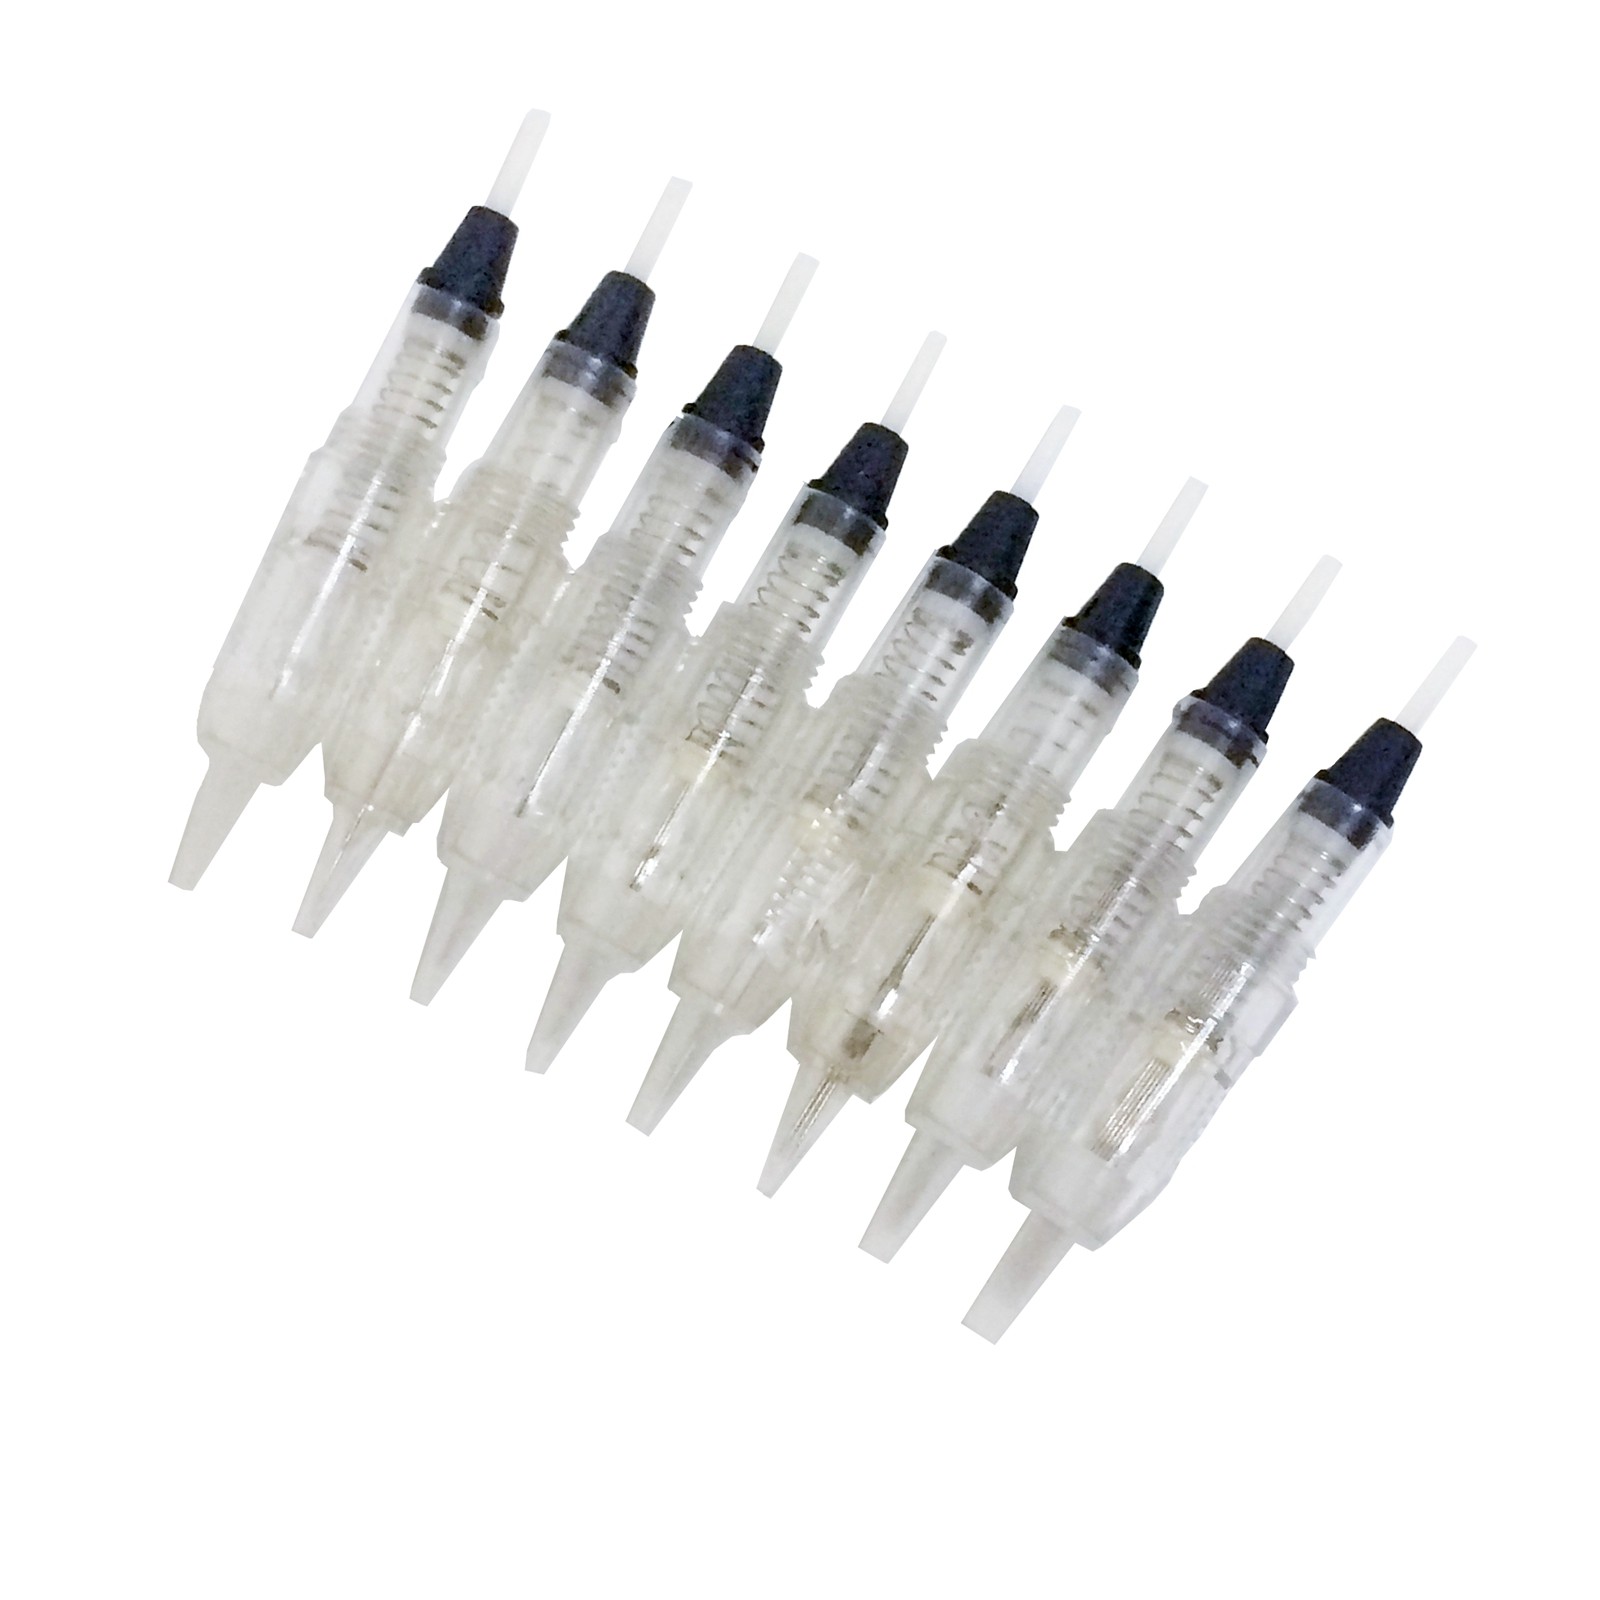 BoLin-Find Semi Disposable Tattoo Needle Cartridges From Bolin Cosmetic-2